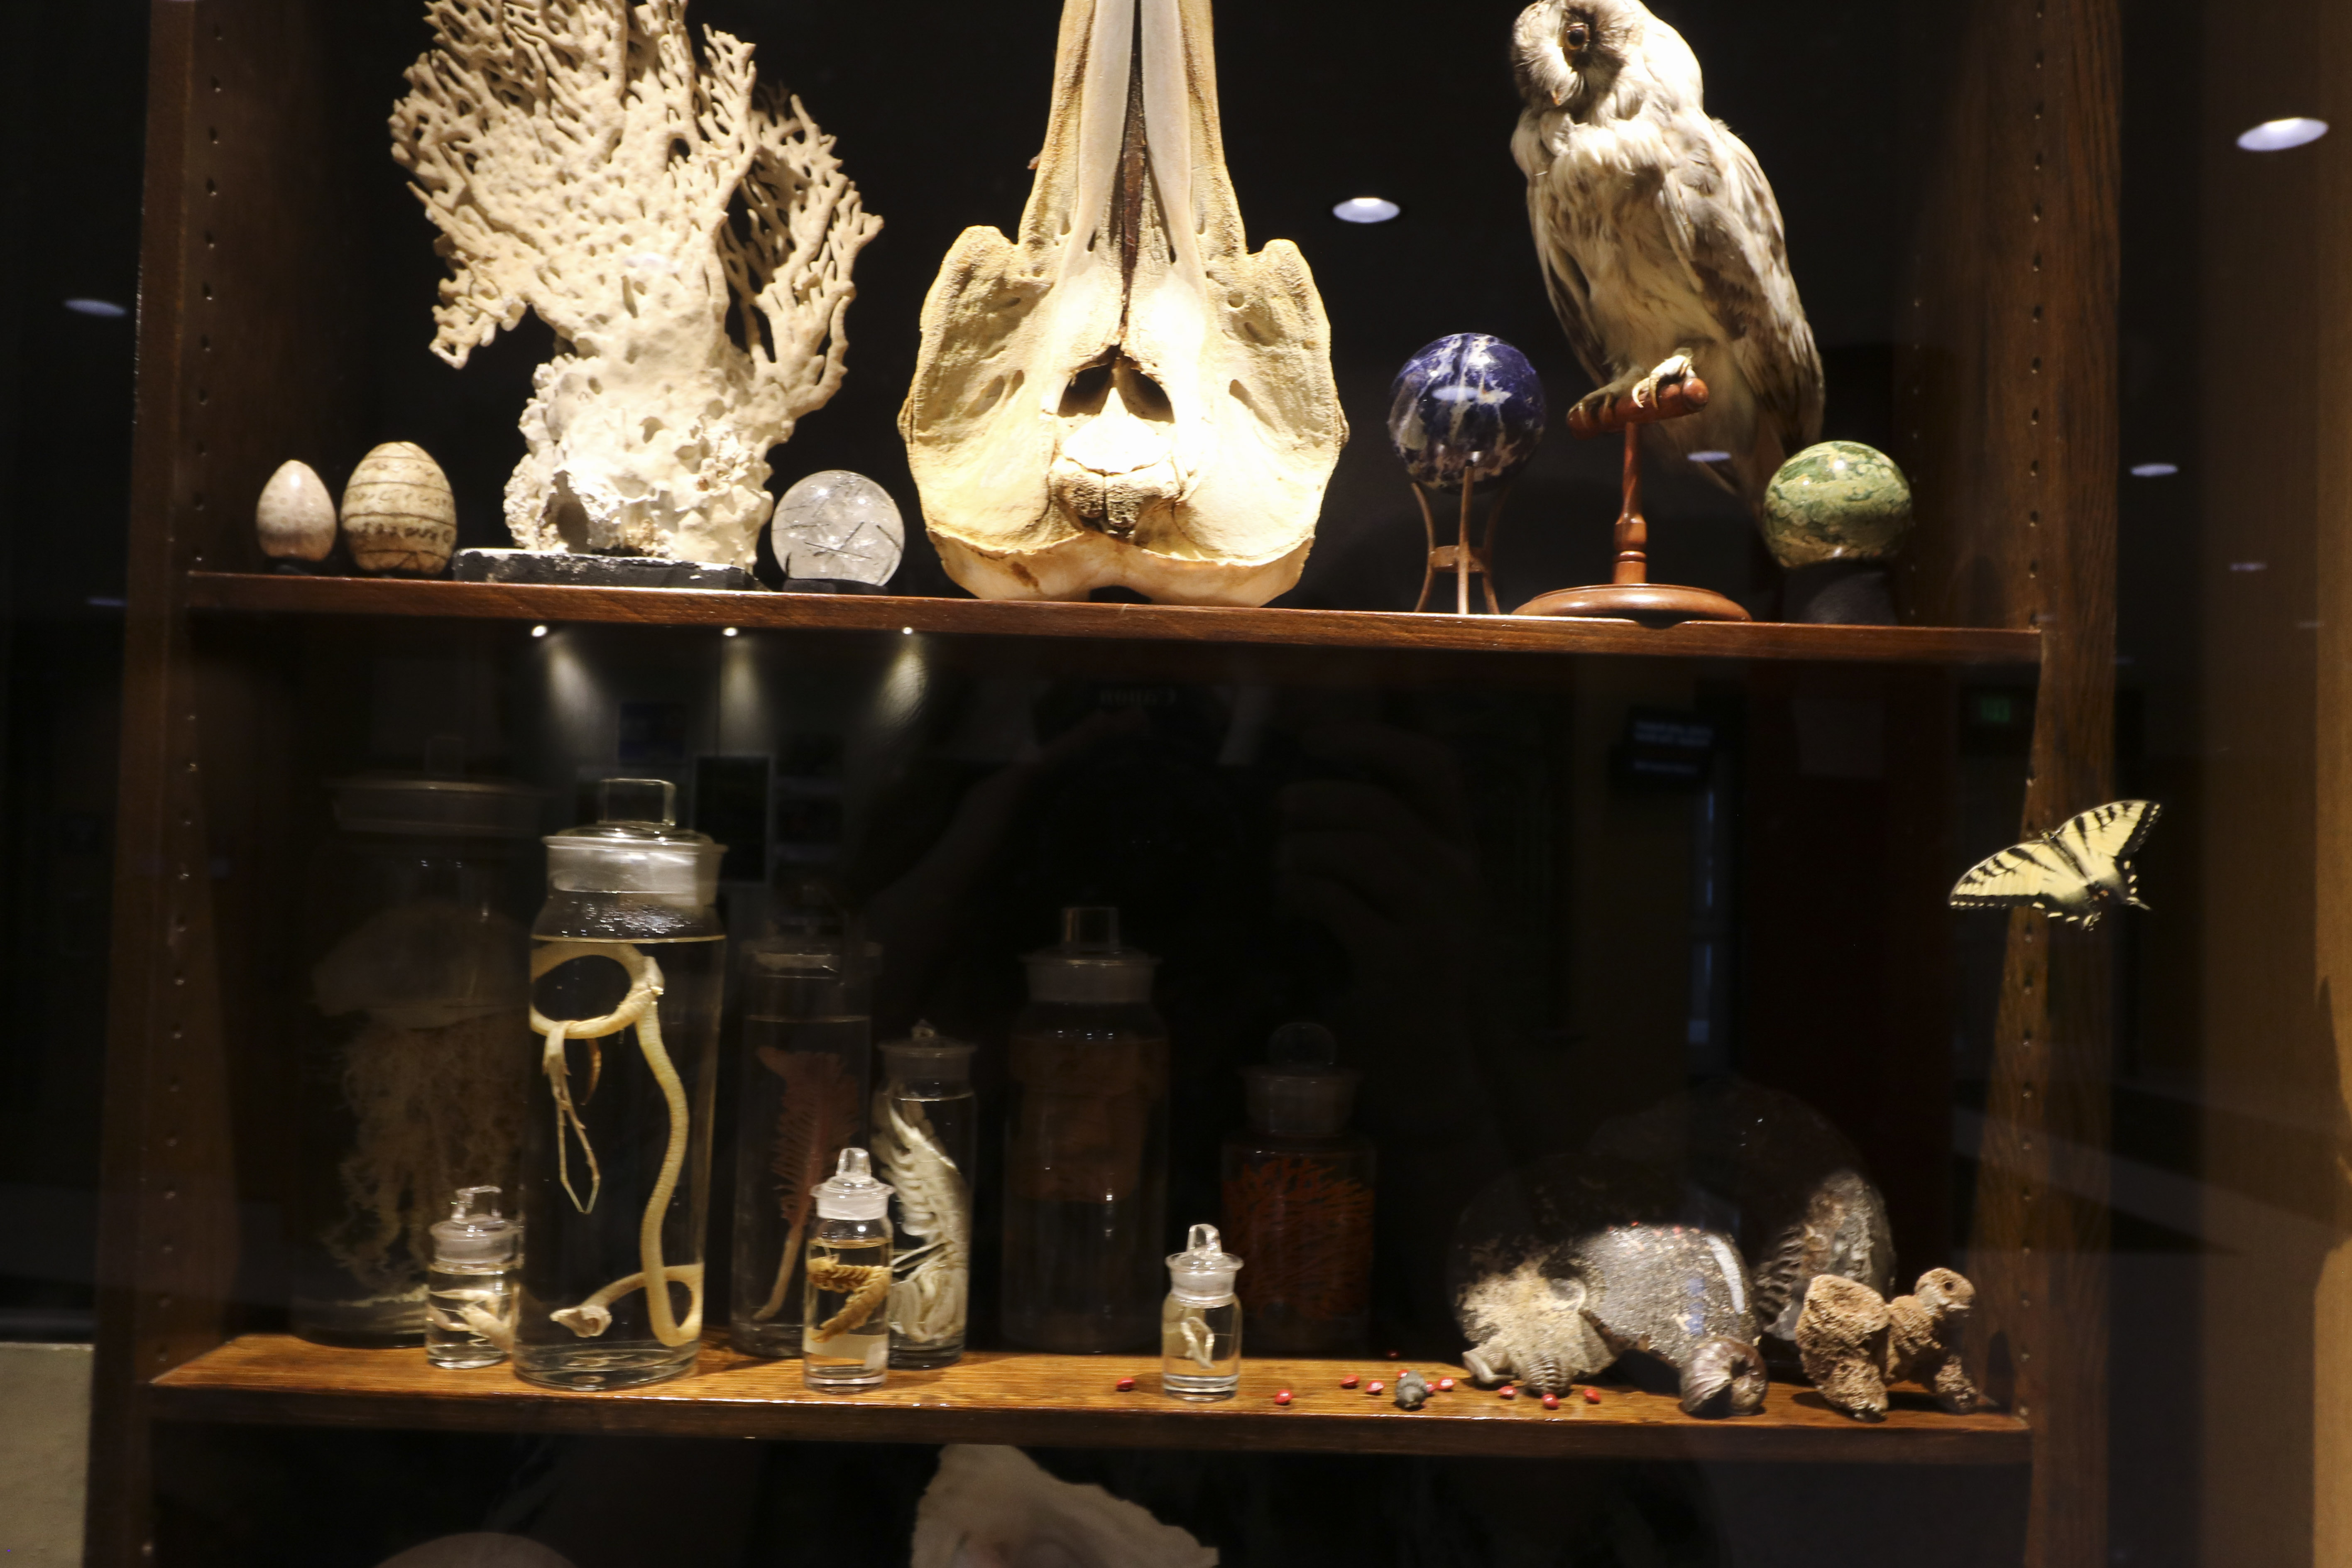 The cabinet of curiosities in the “Shelving the History of Life” exhibit showcases minerals, wet specimens, and shells. Ava Nederlander, Staff Photographer.